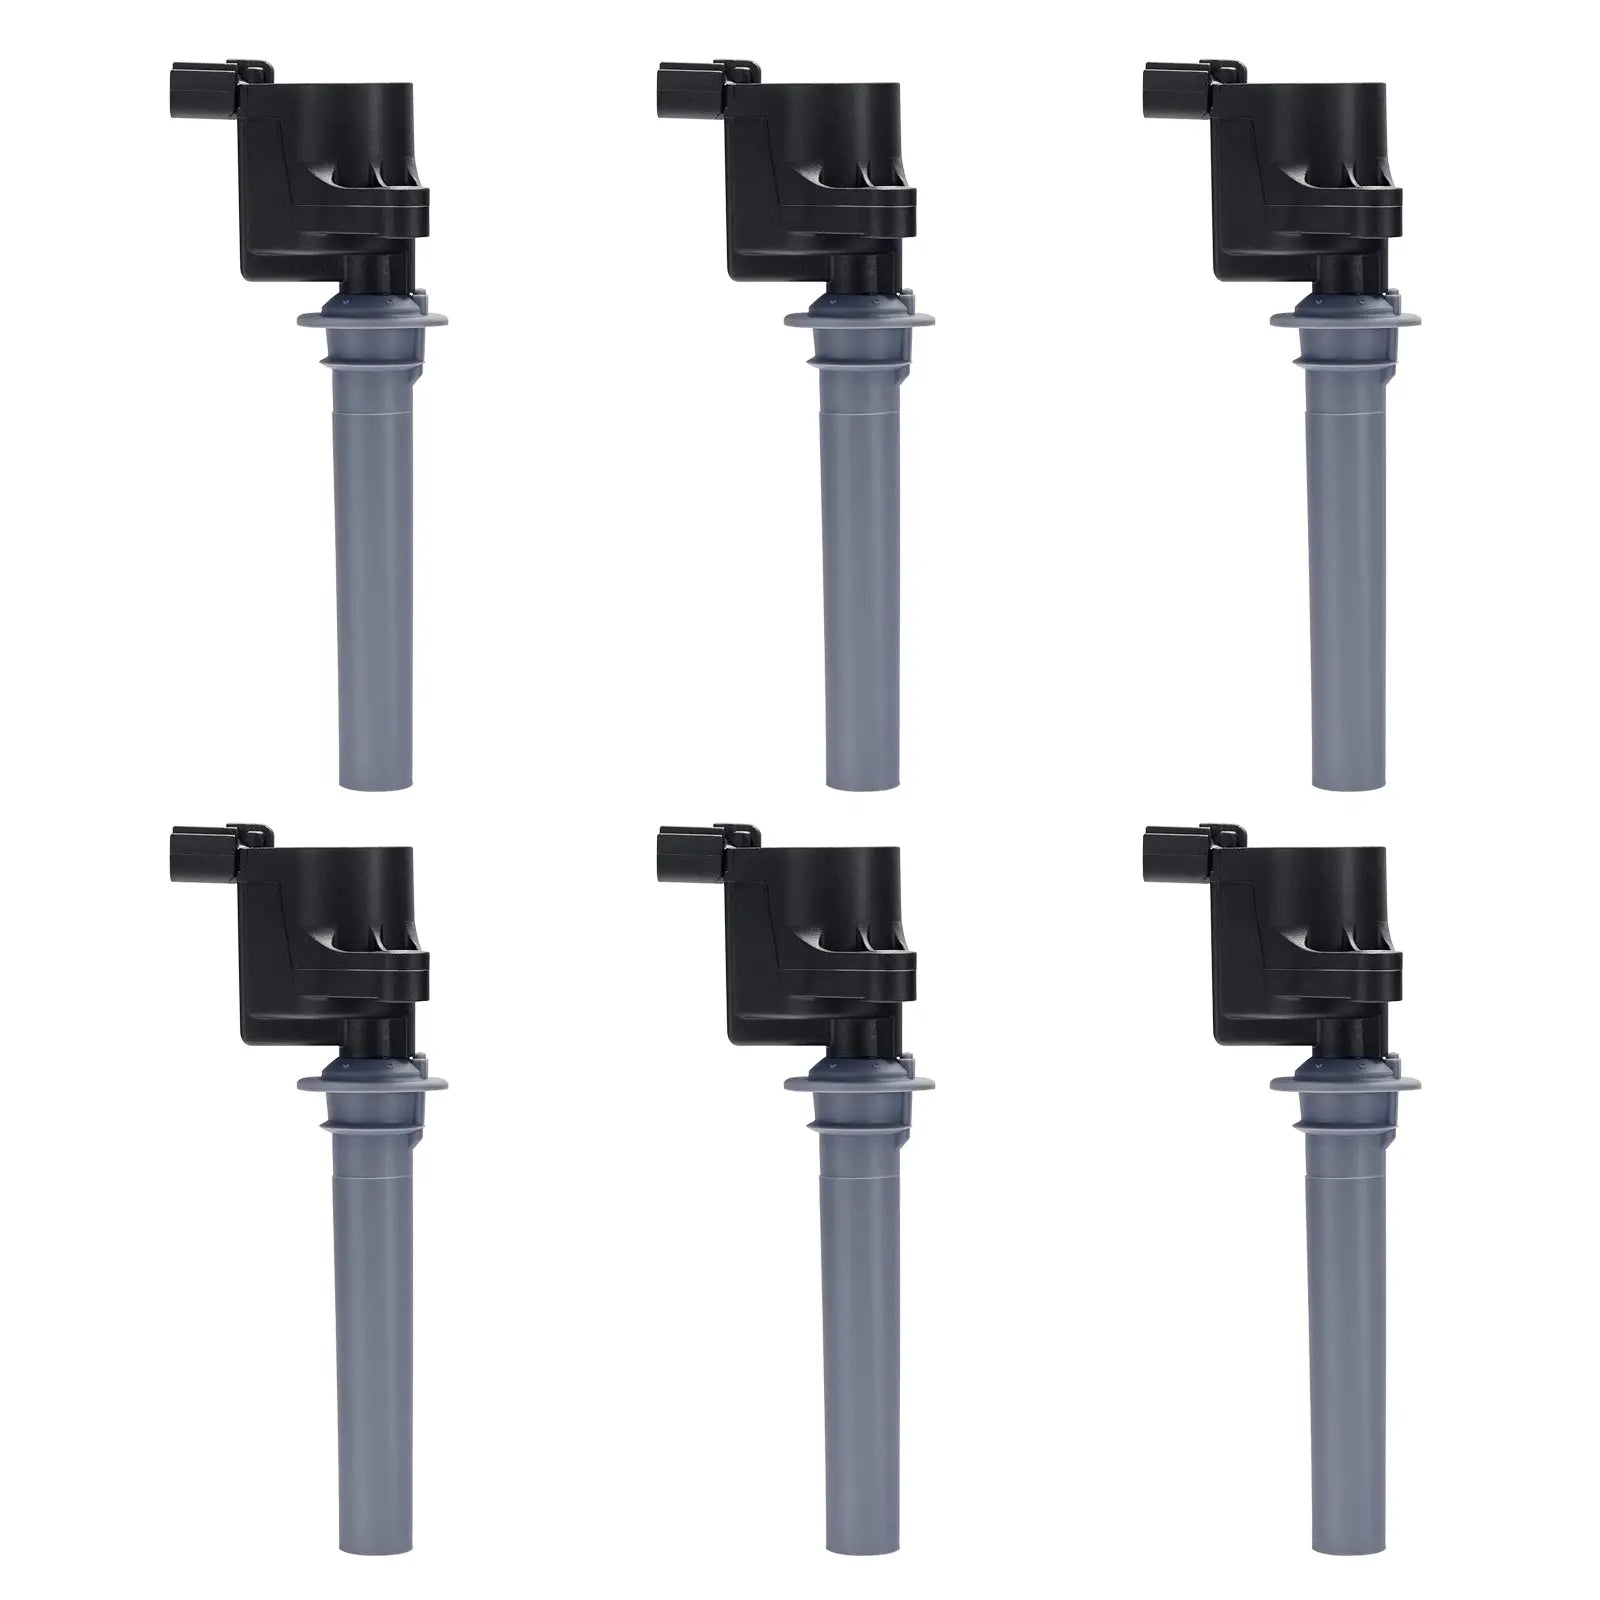 Ignition Coil Pack for 2000-2008 Ford Escape Taurus Mazda Tribute